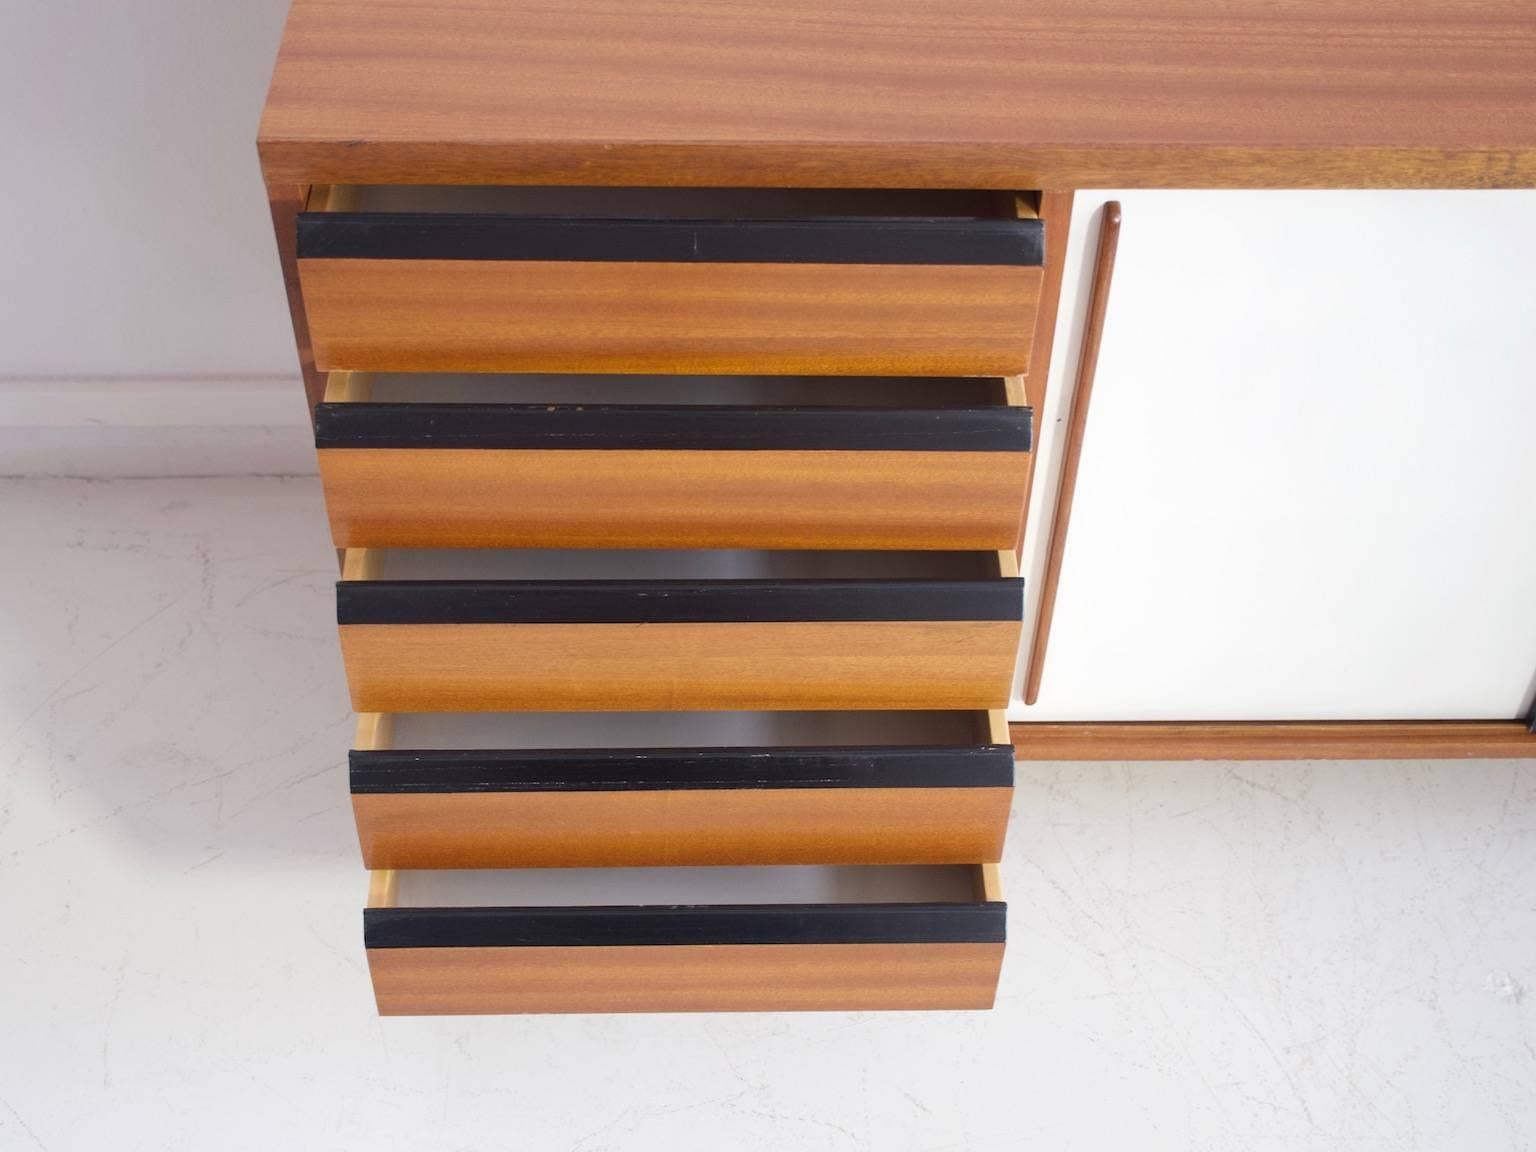 European Teak Sideboard with Black and White Painted Sliding Doors and Five Drawers